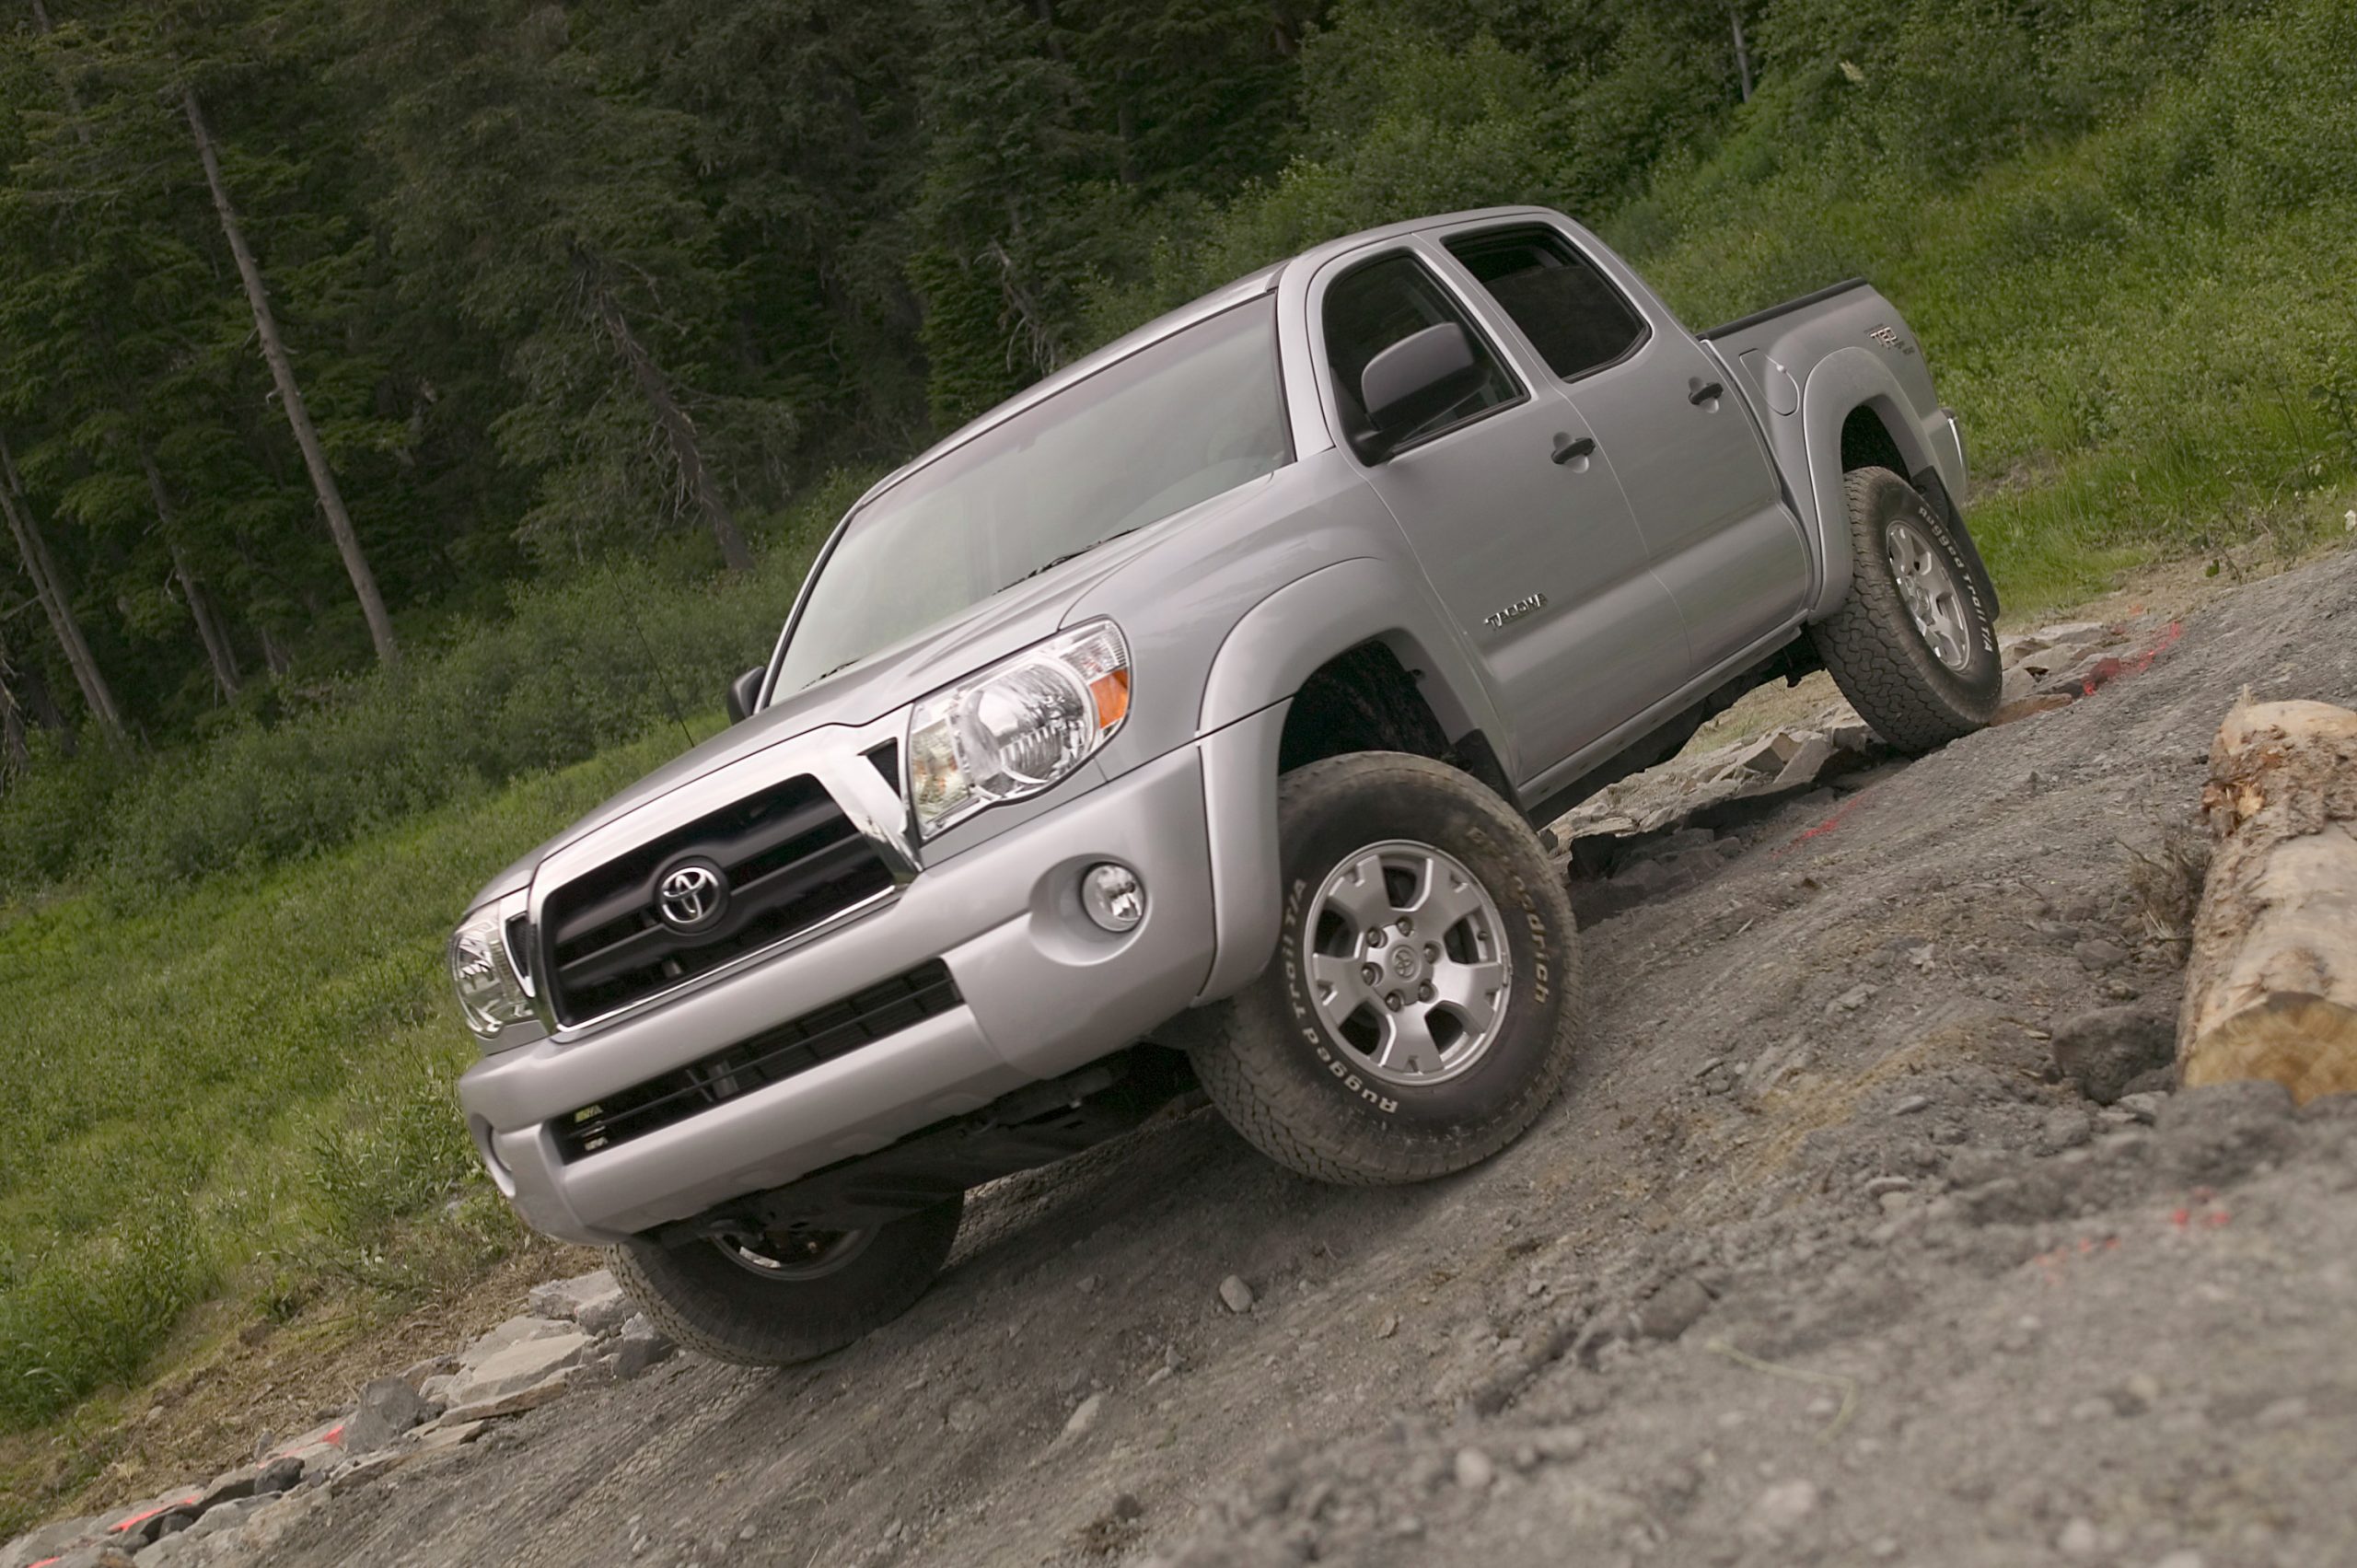 a silver 2007 used Toyota Tacoma driving off-road on a rocky trail